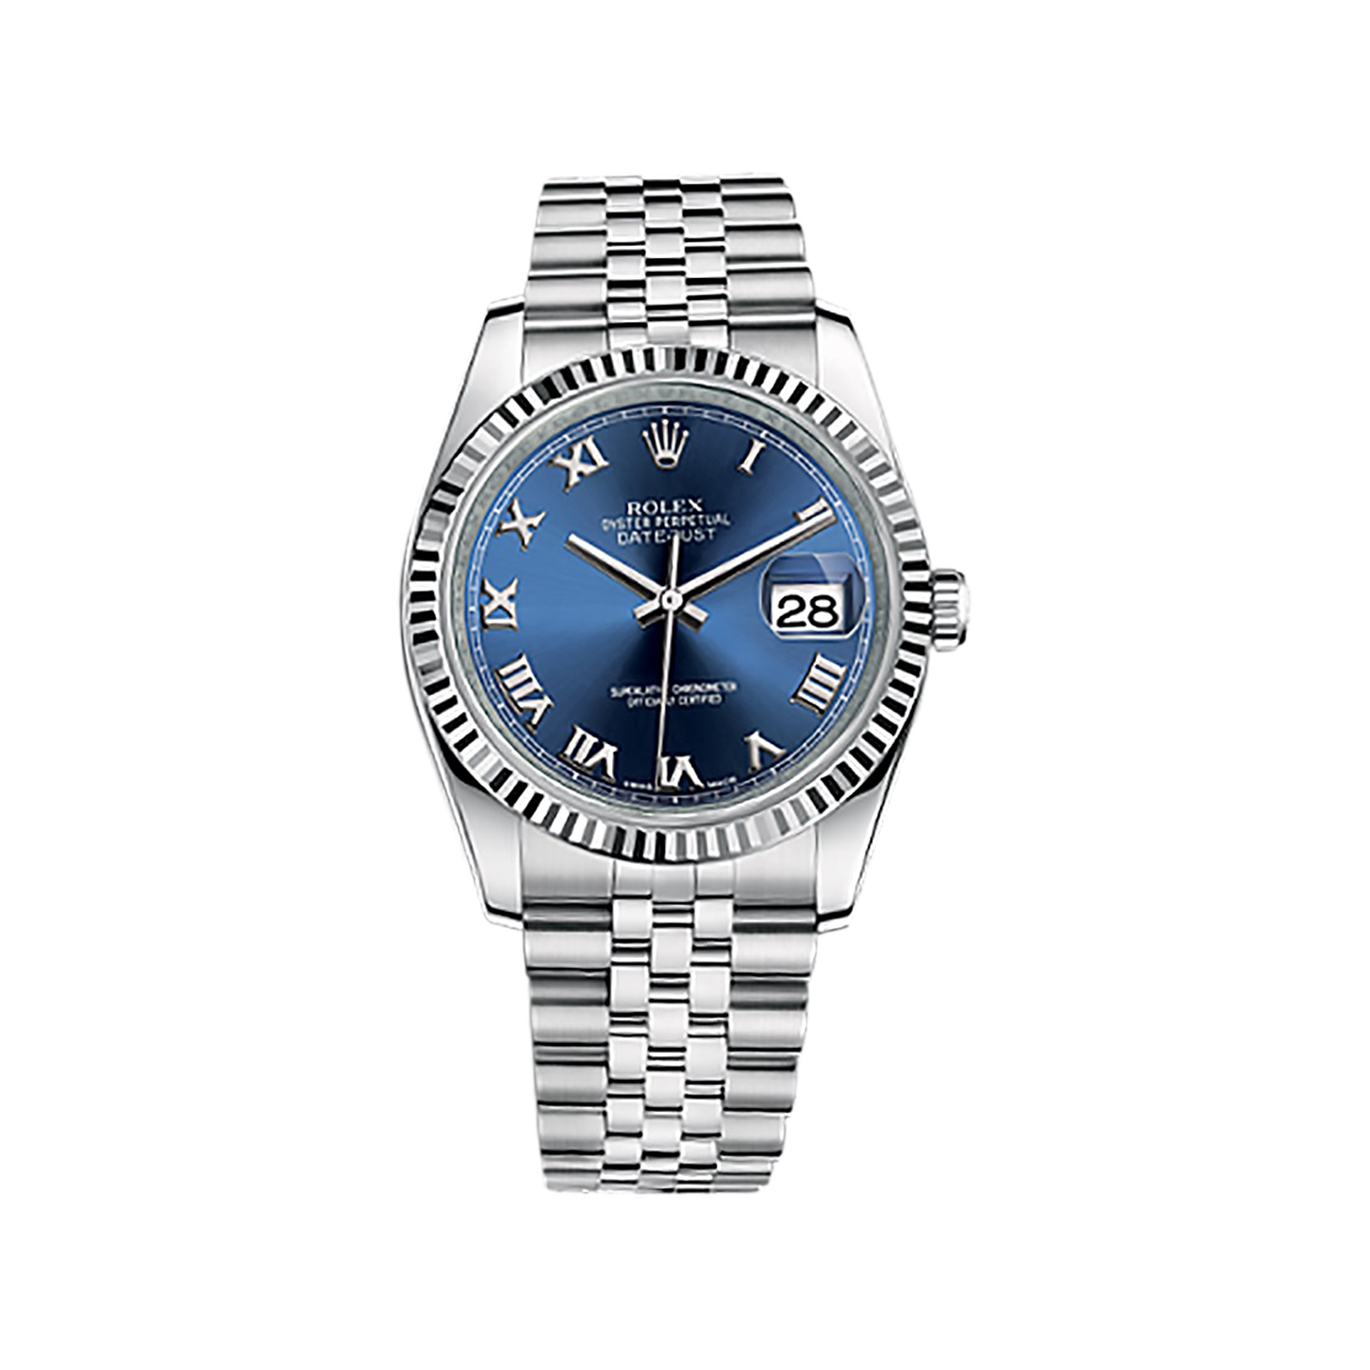 Datejust 36 116234 White Gold & Stainless Steel Watch (Blue)